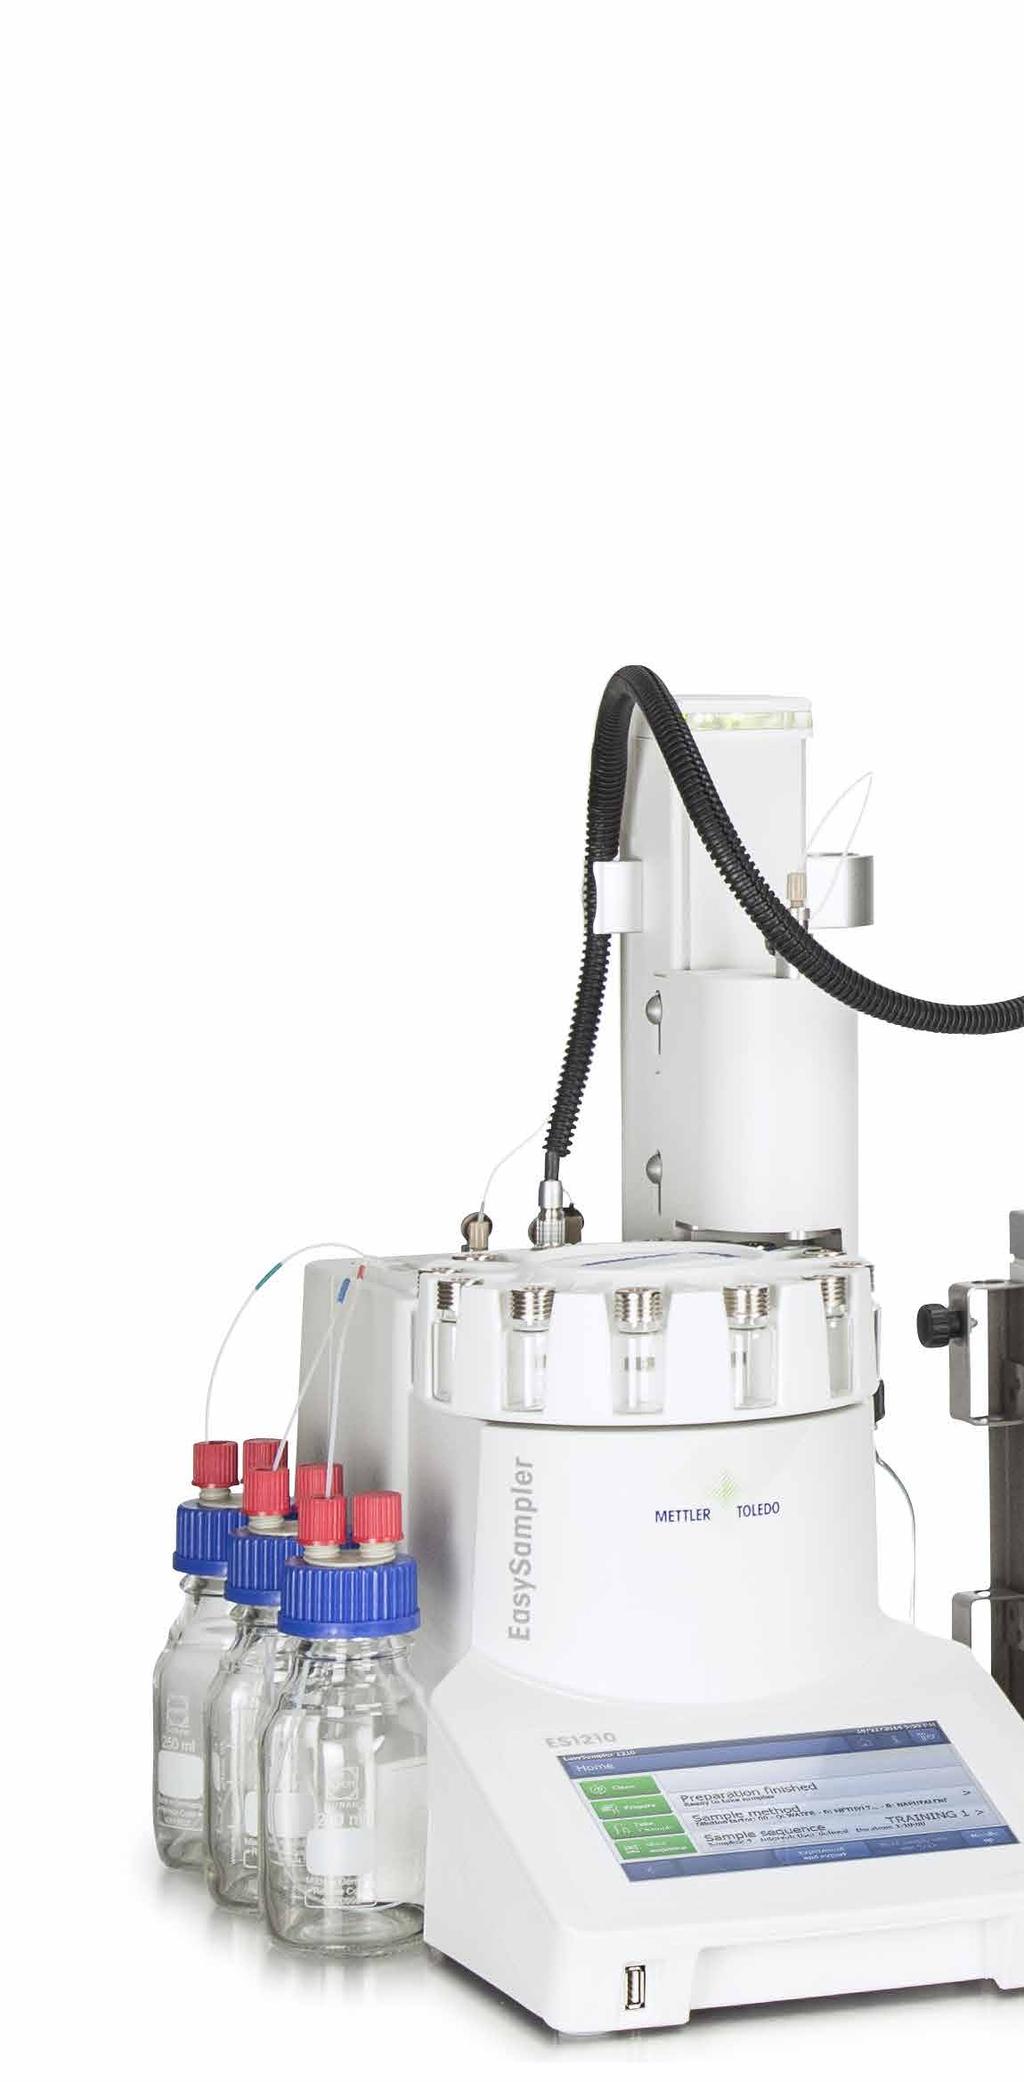 Tools to Speed Chemical Development Tools to Speed Chemical Development Automated Synthesis with HPLC Sampling "The productivity gain through EasySampler changes the way chemists work in the